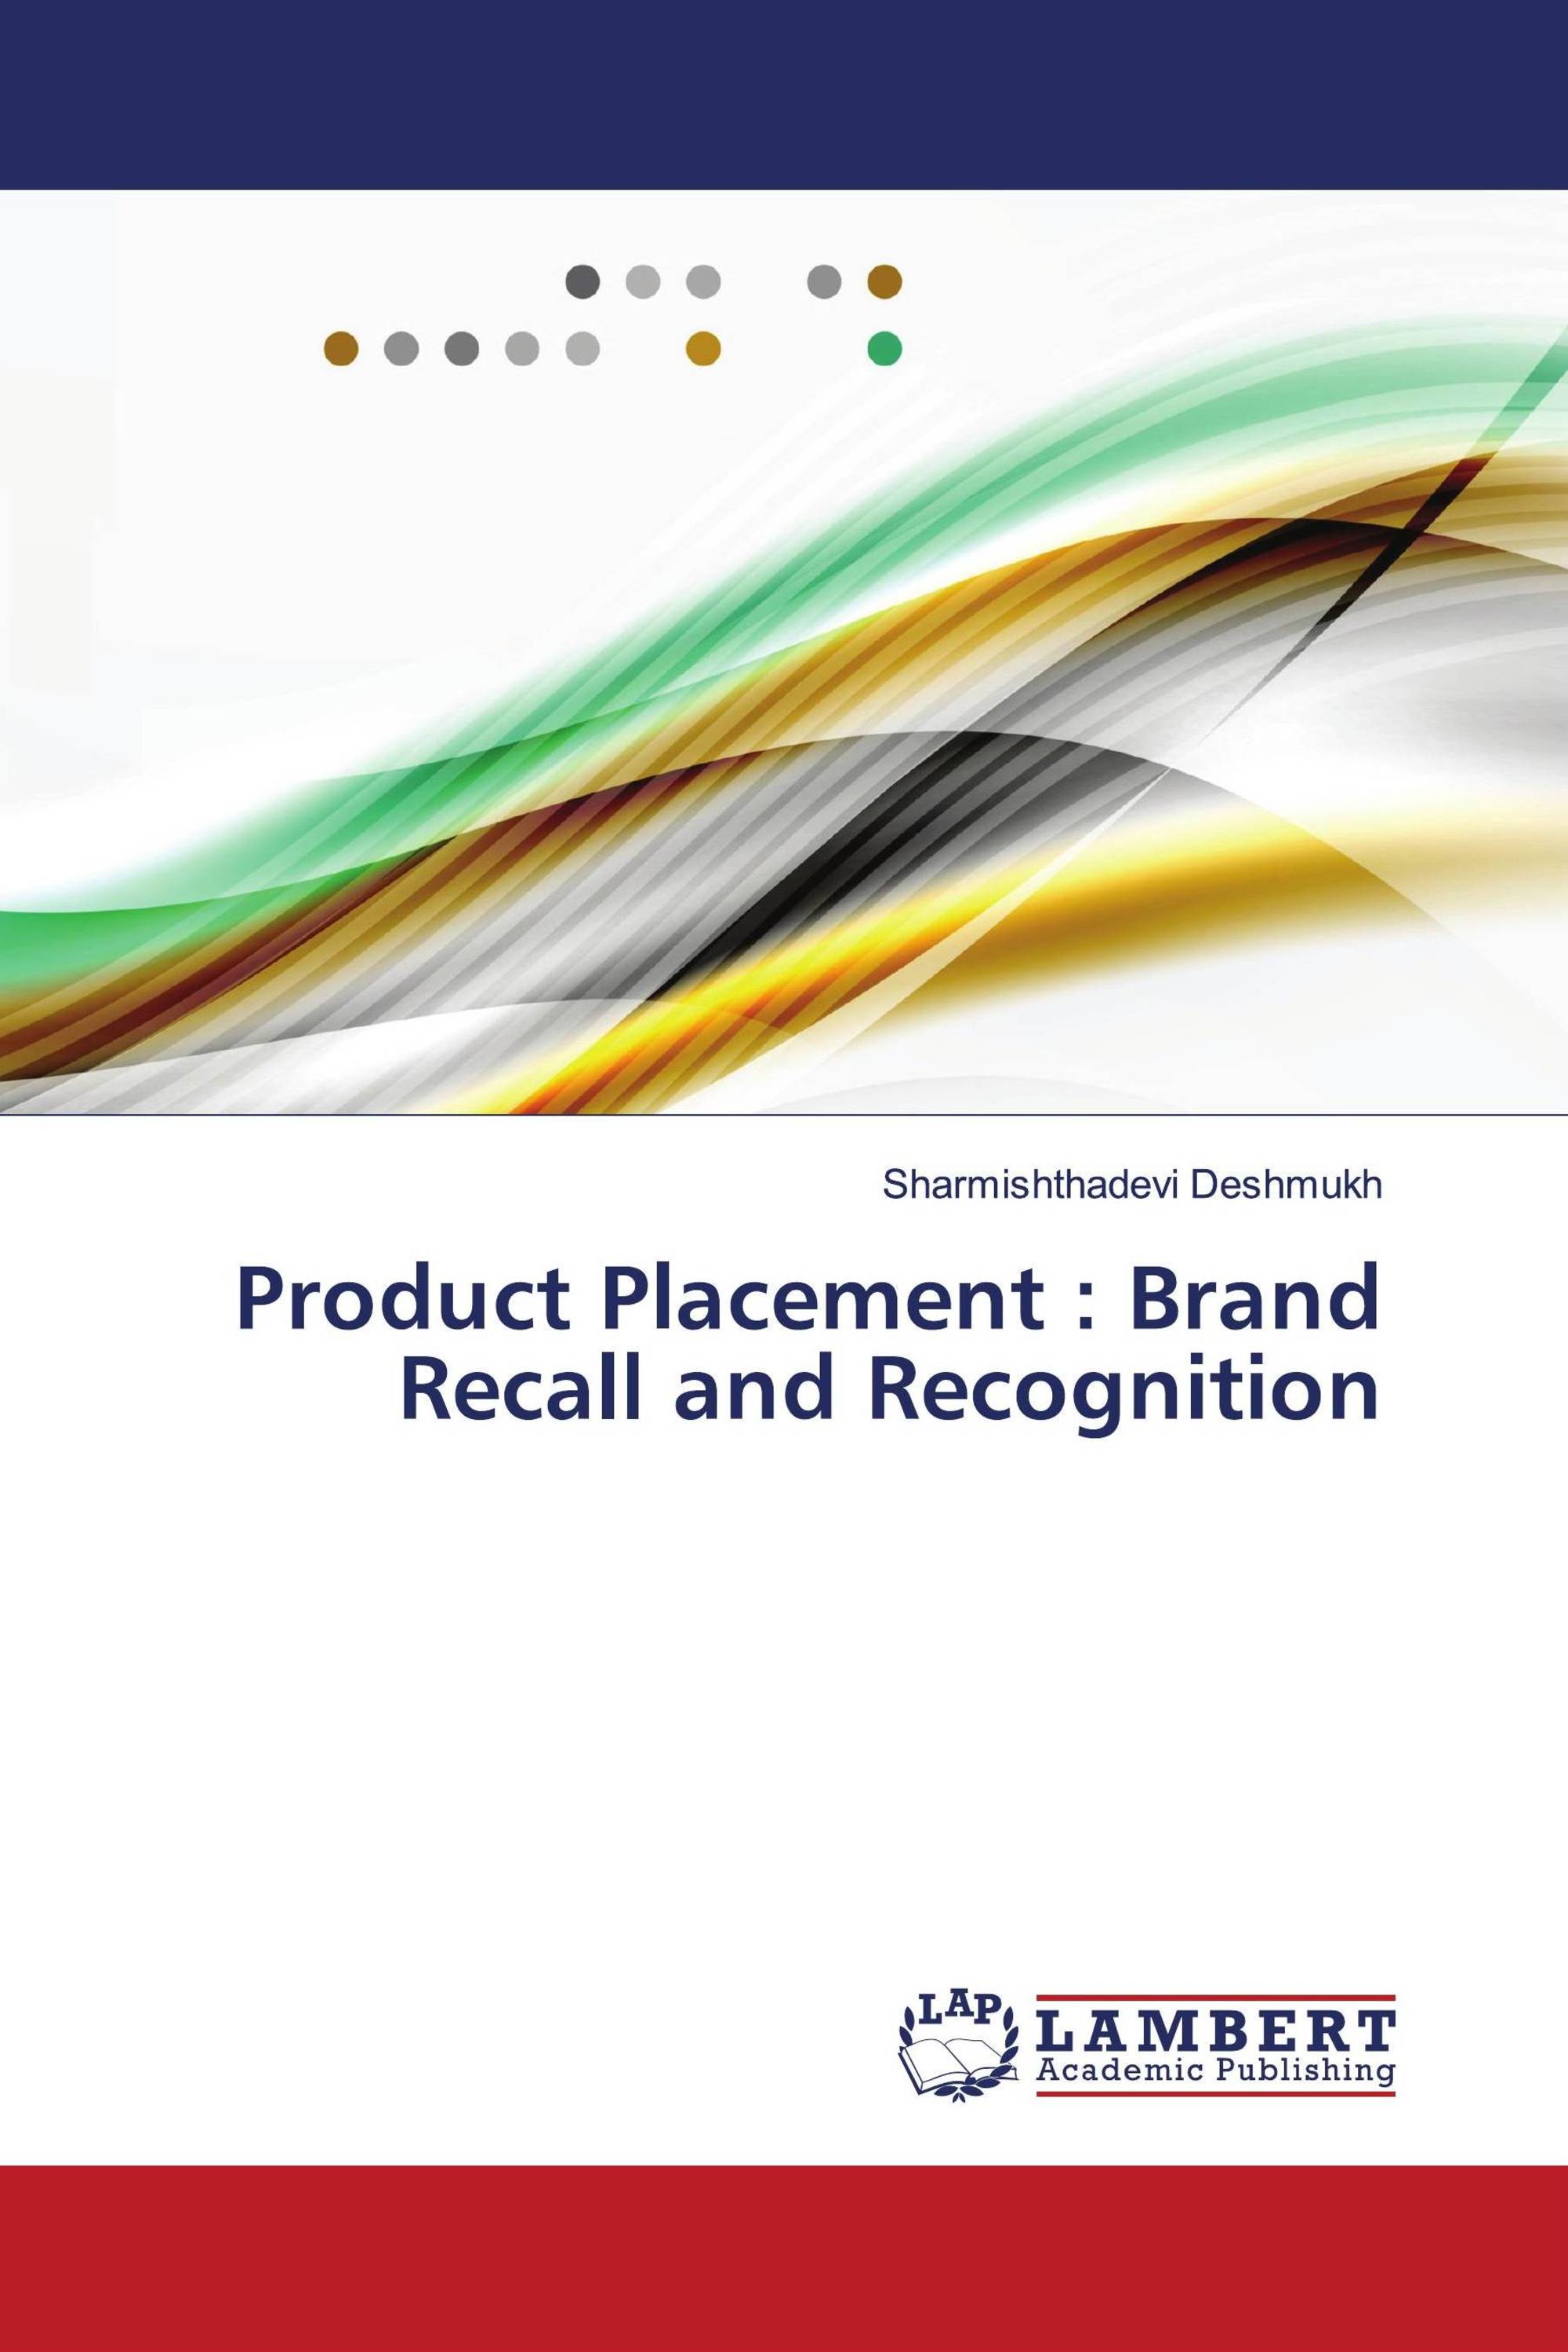 Product Placement : Brand Recall and Recognition